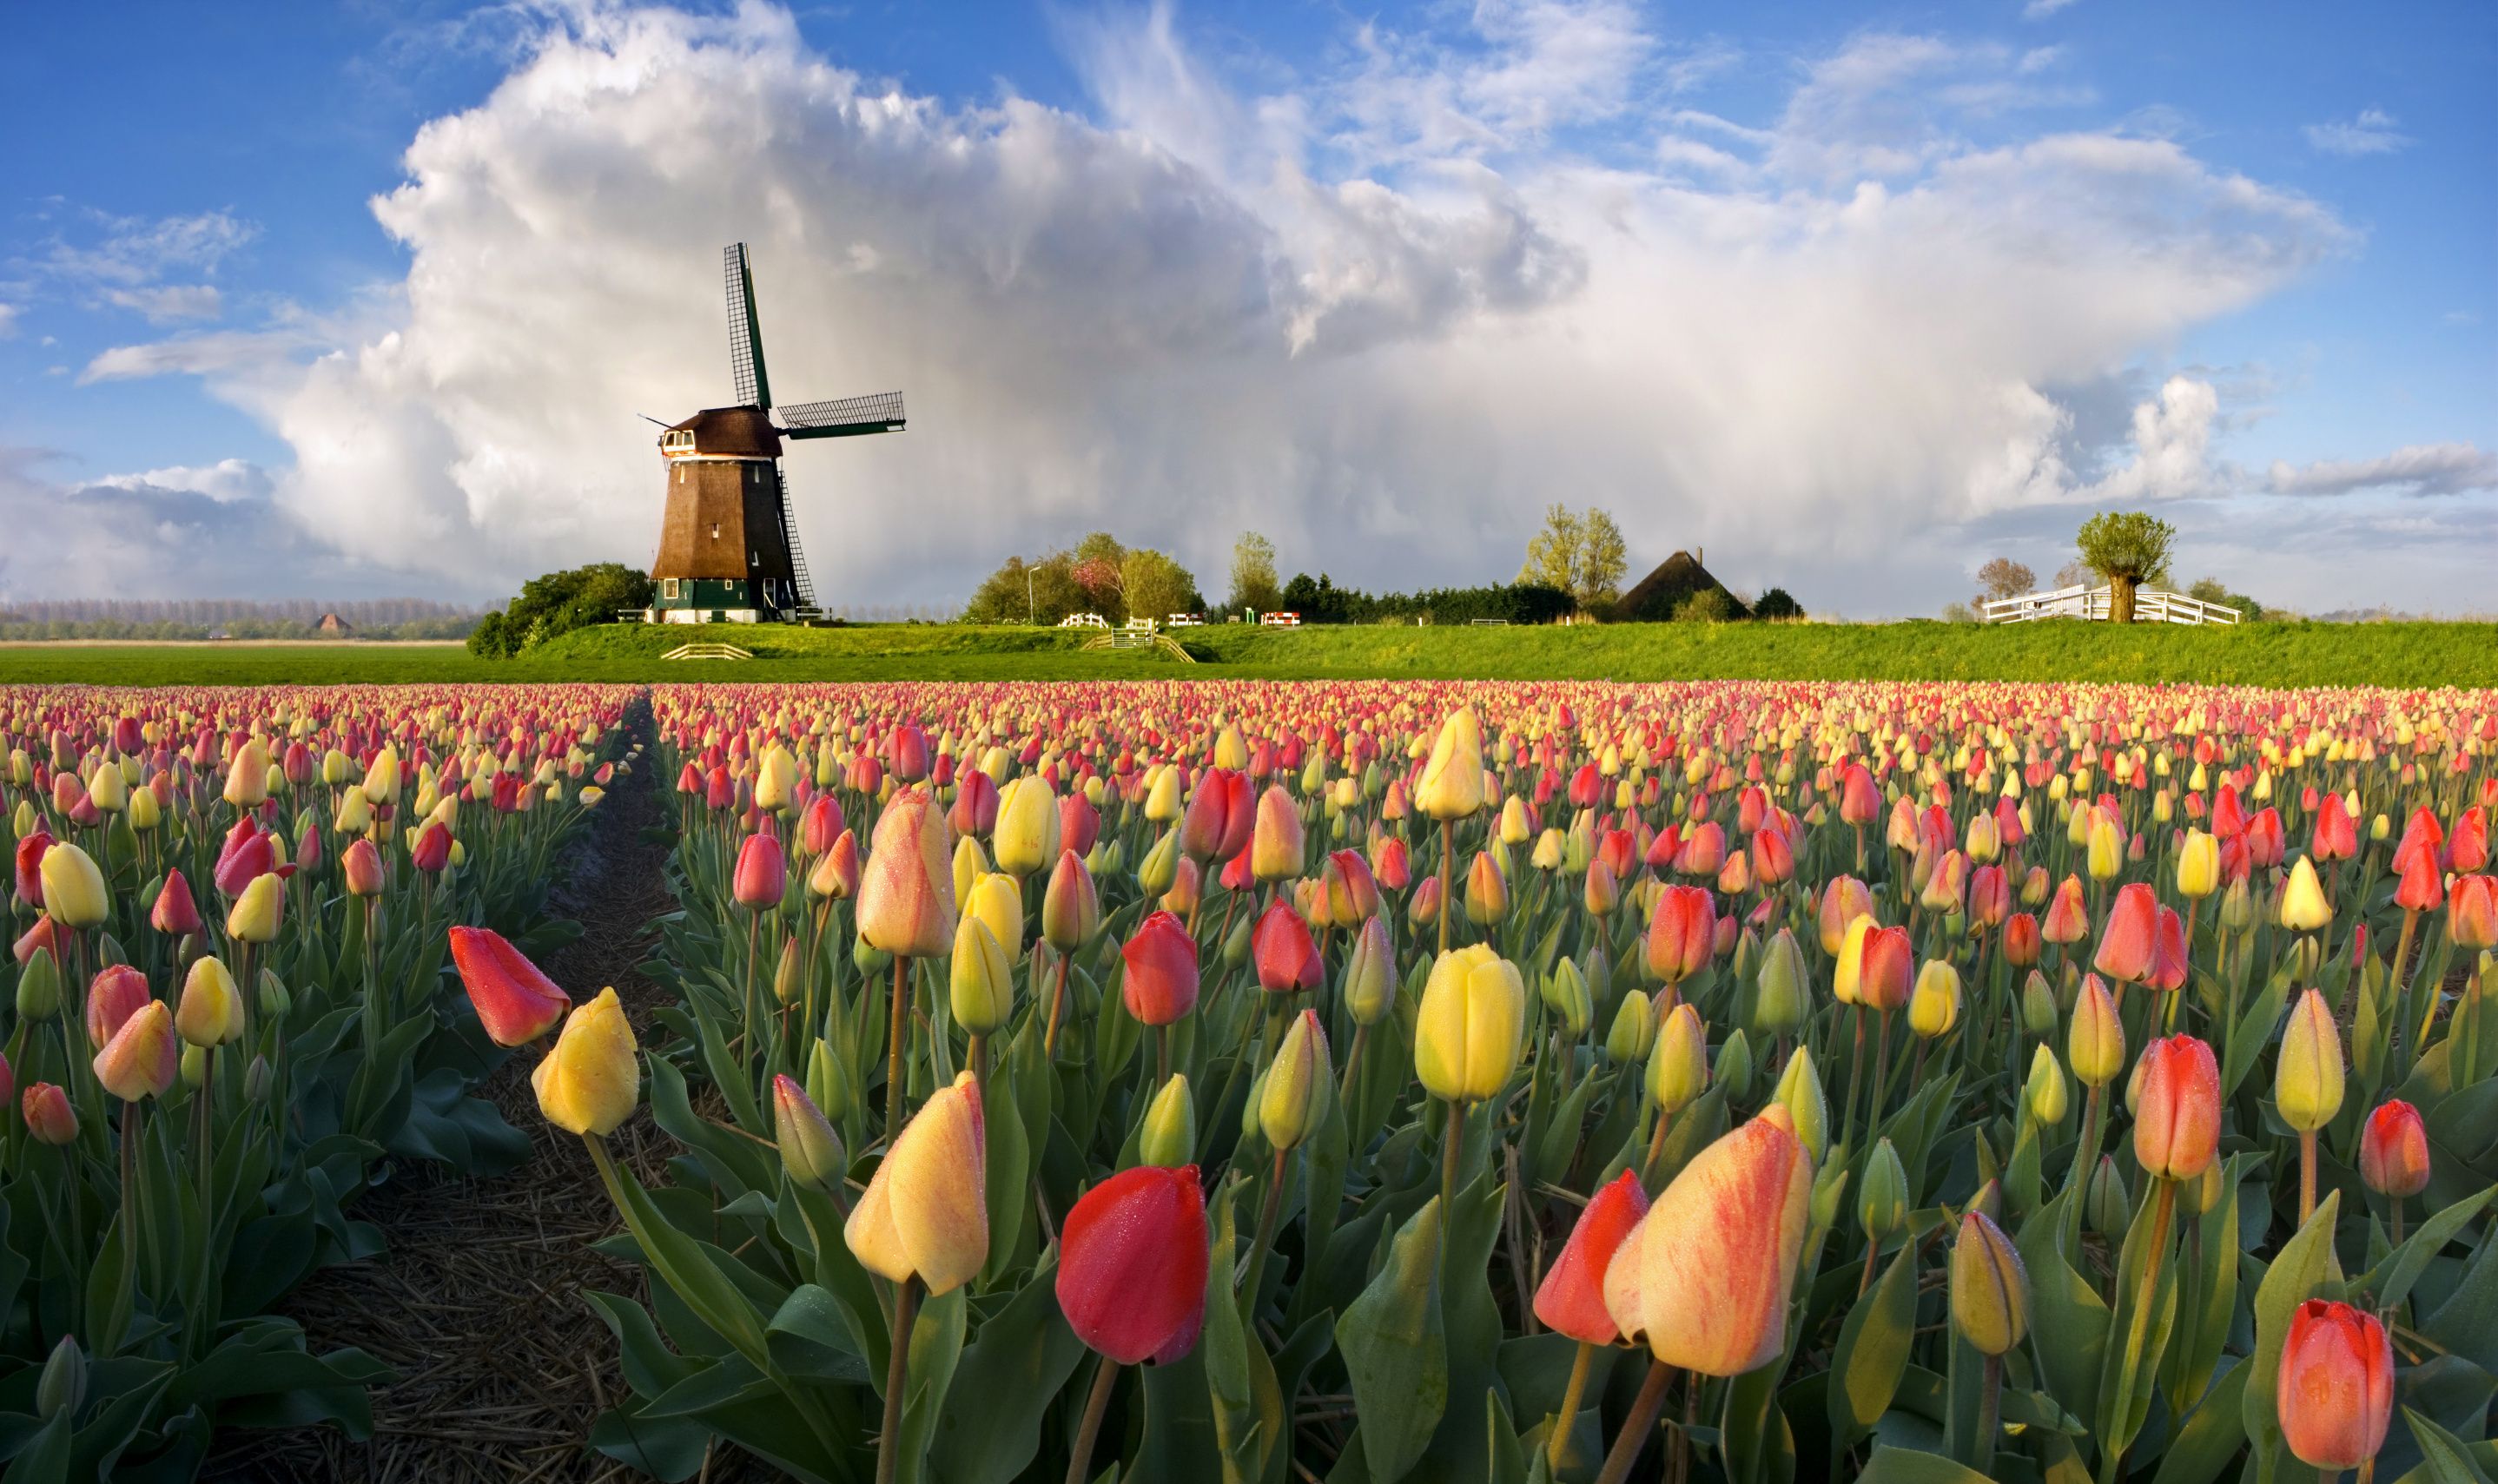 Wallpaper. Nature. photo. picture. Holland, field, plantation